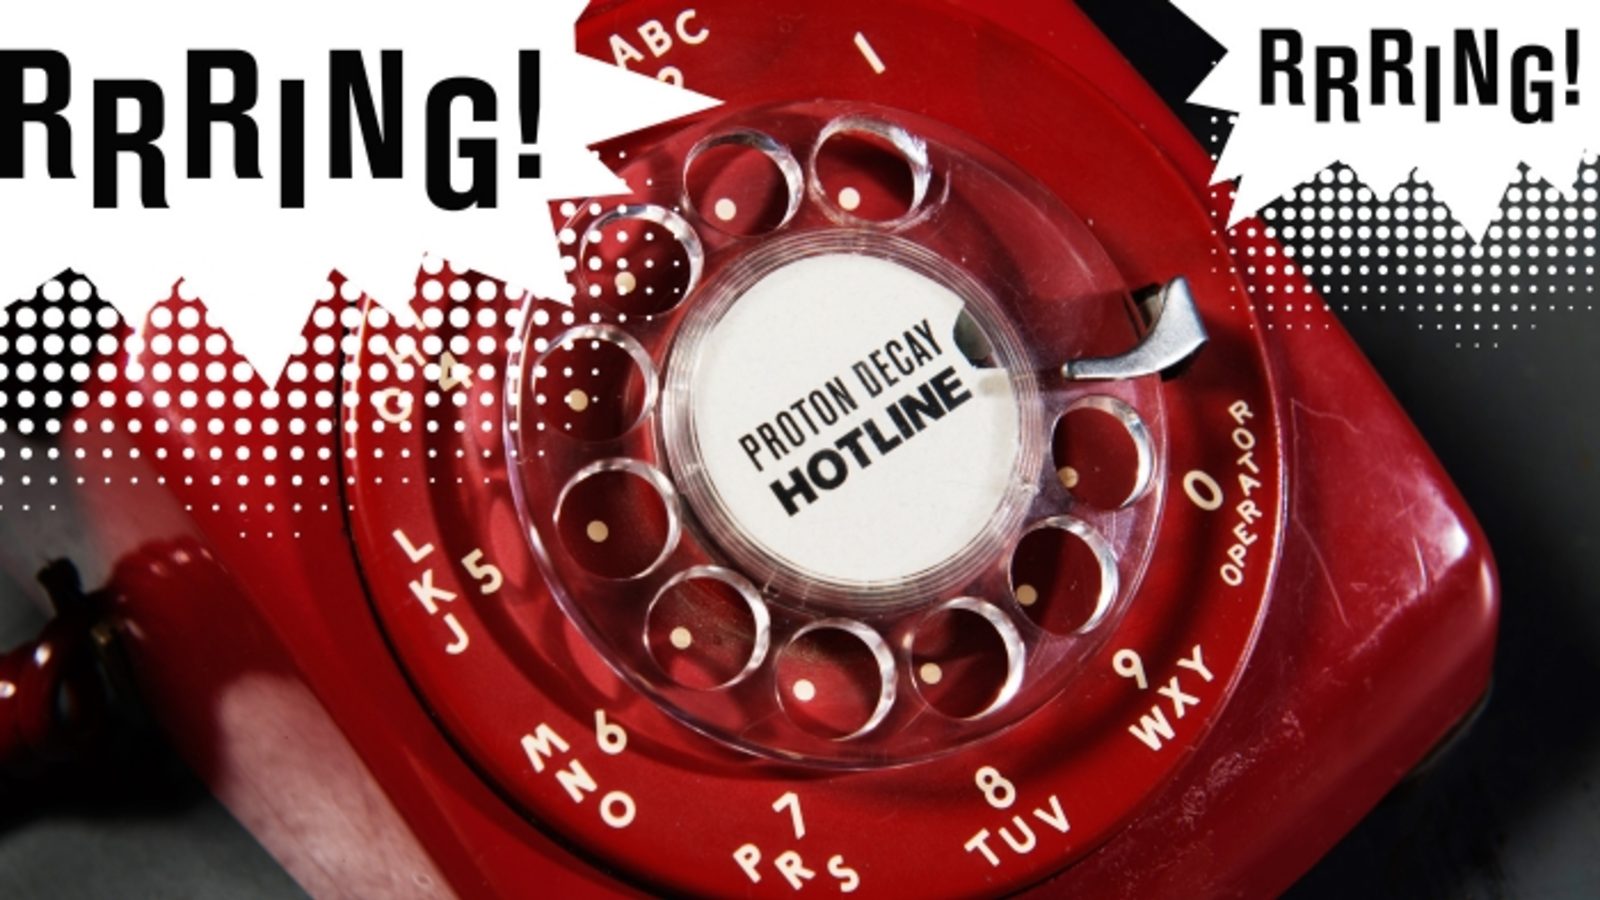 Photo of old red dial telephone that says "Rrring!"